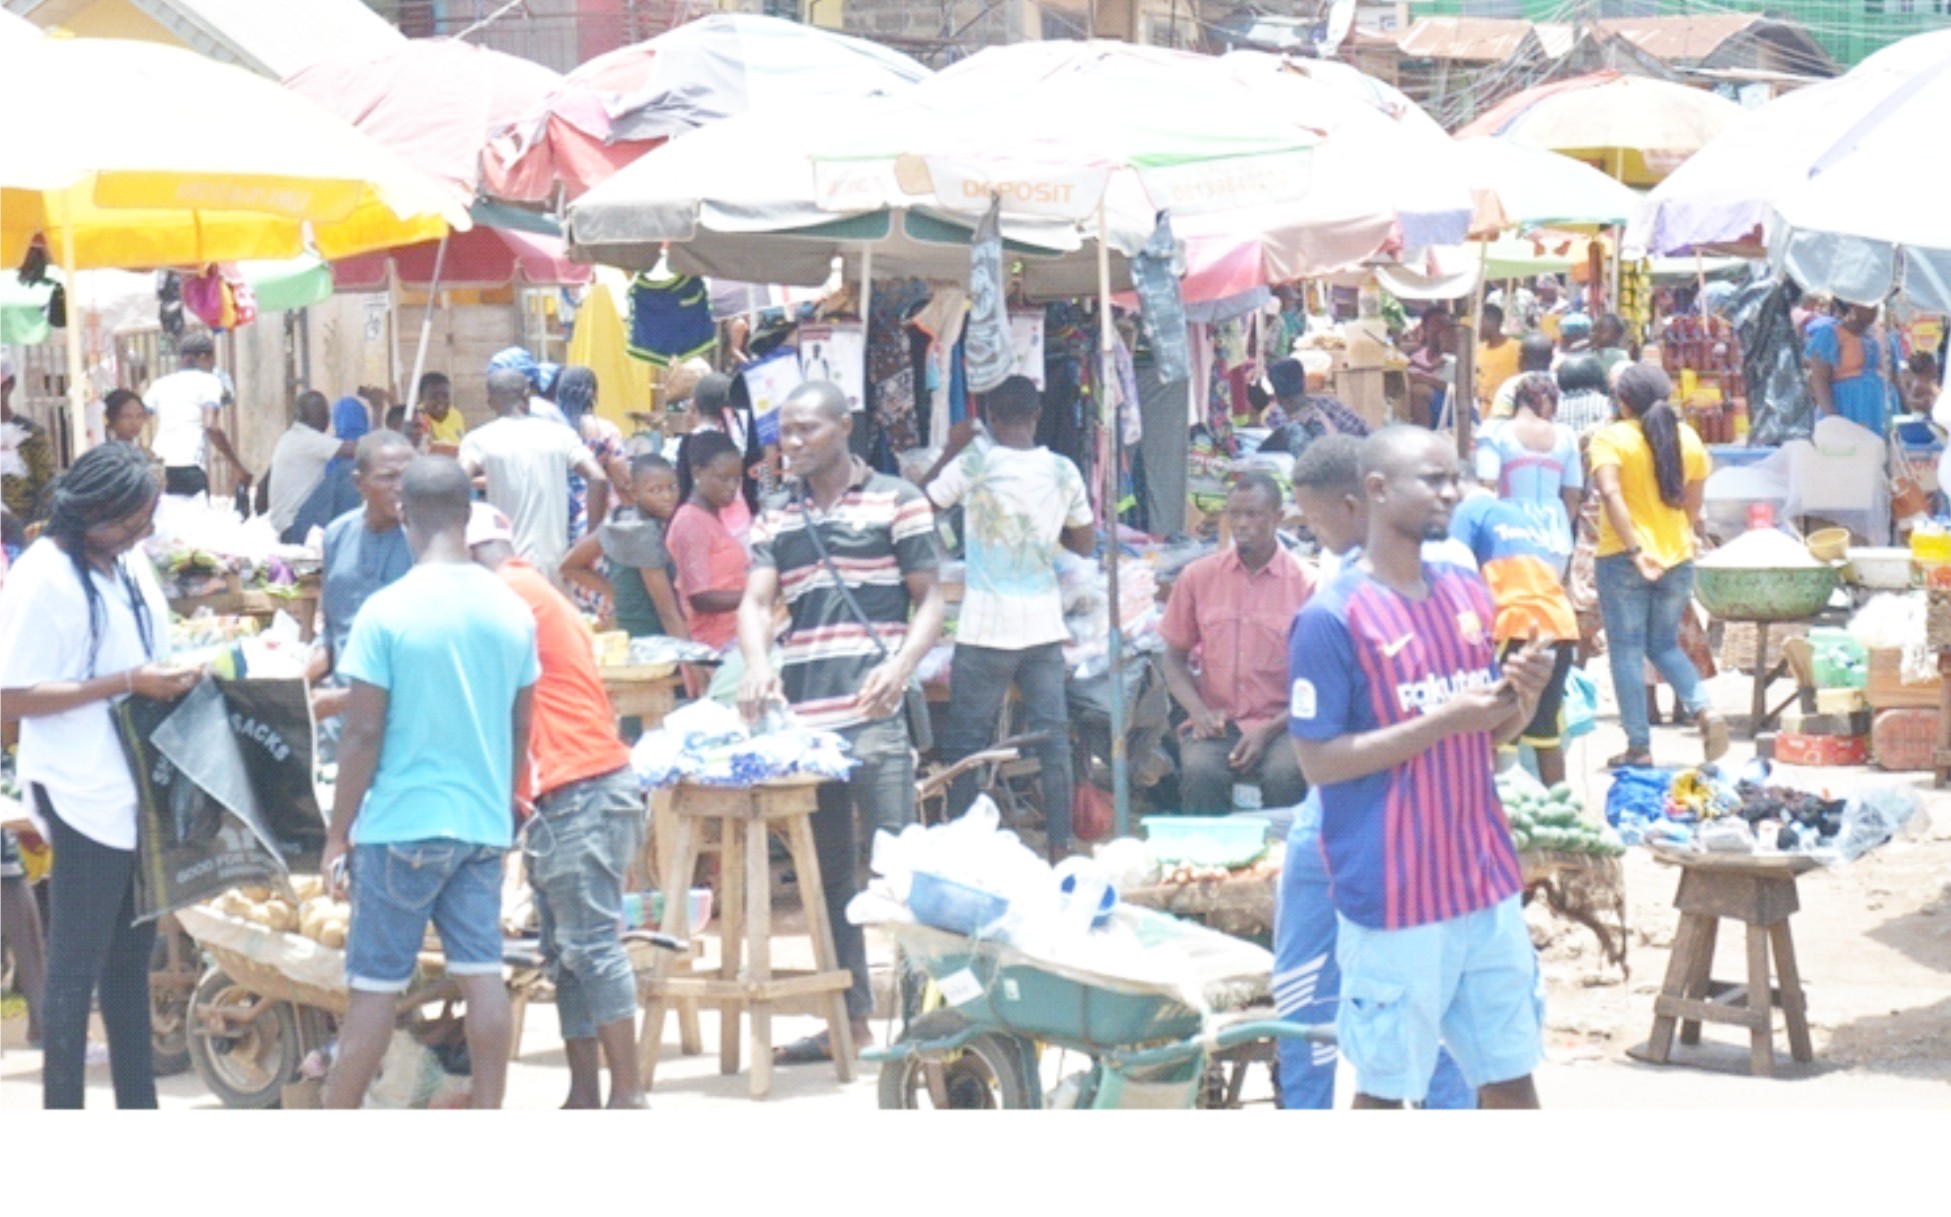 Despite government's directive to curb the spread of COVID-19 pandemic, some traders at the popular Oja-Oba in Akure cluster together without wearing nose masks                                Photo: Stephen Olajide